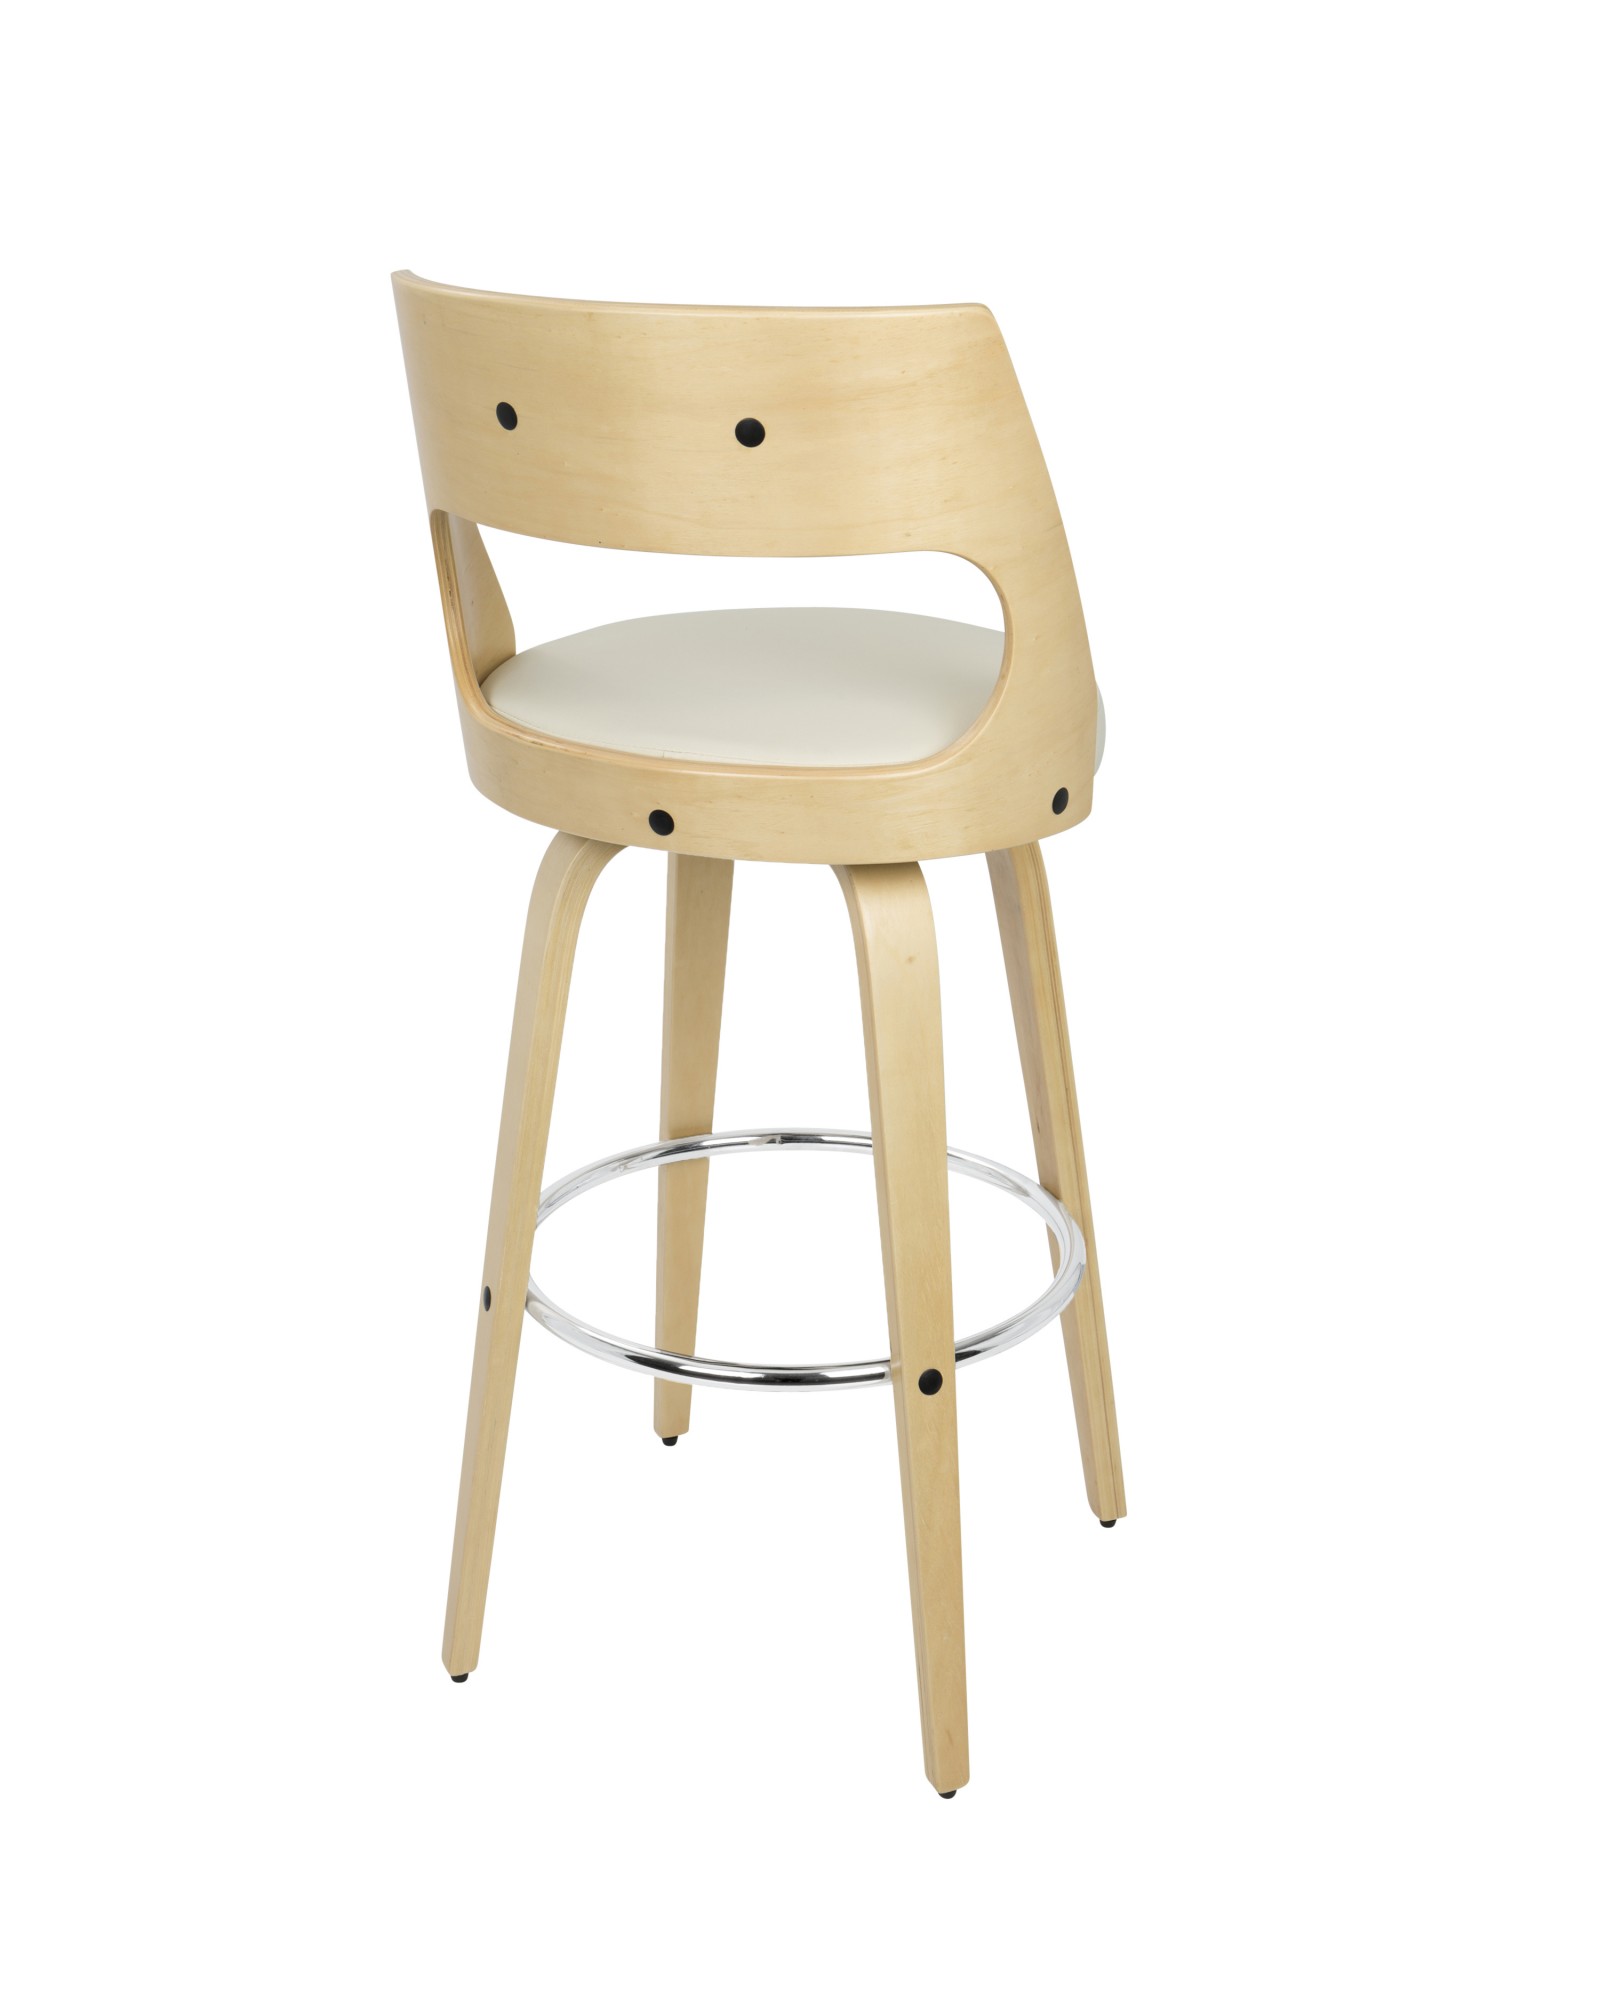 Cecina Mid-Century Modern Barstool with Swivel in Natural and Cream Faux Leather